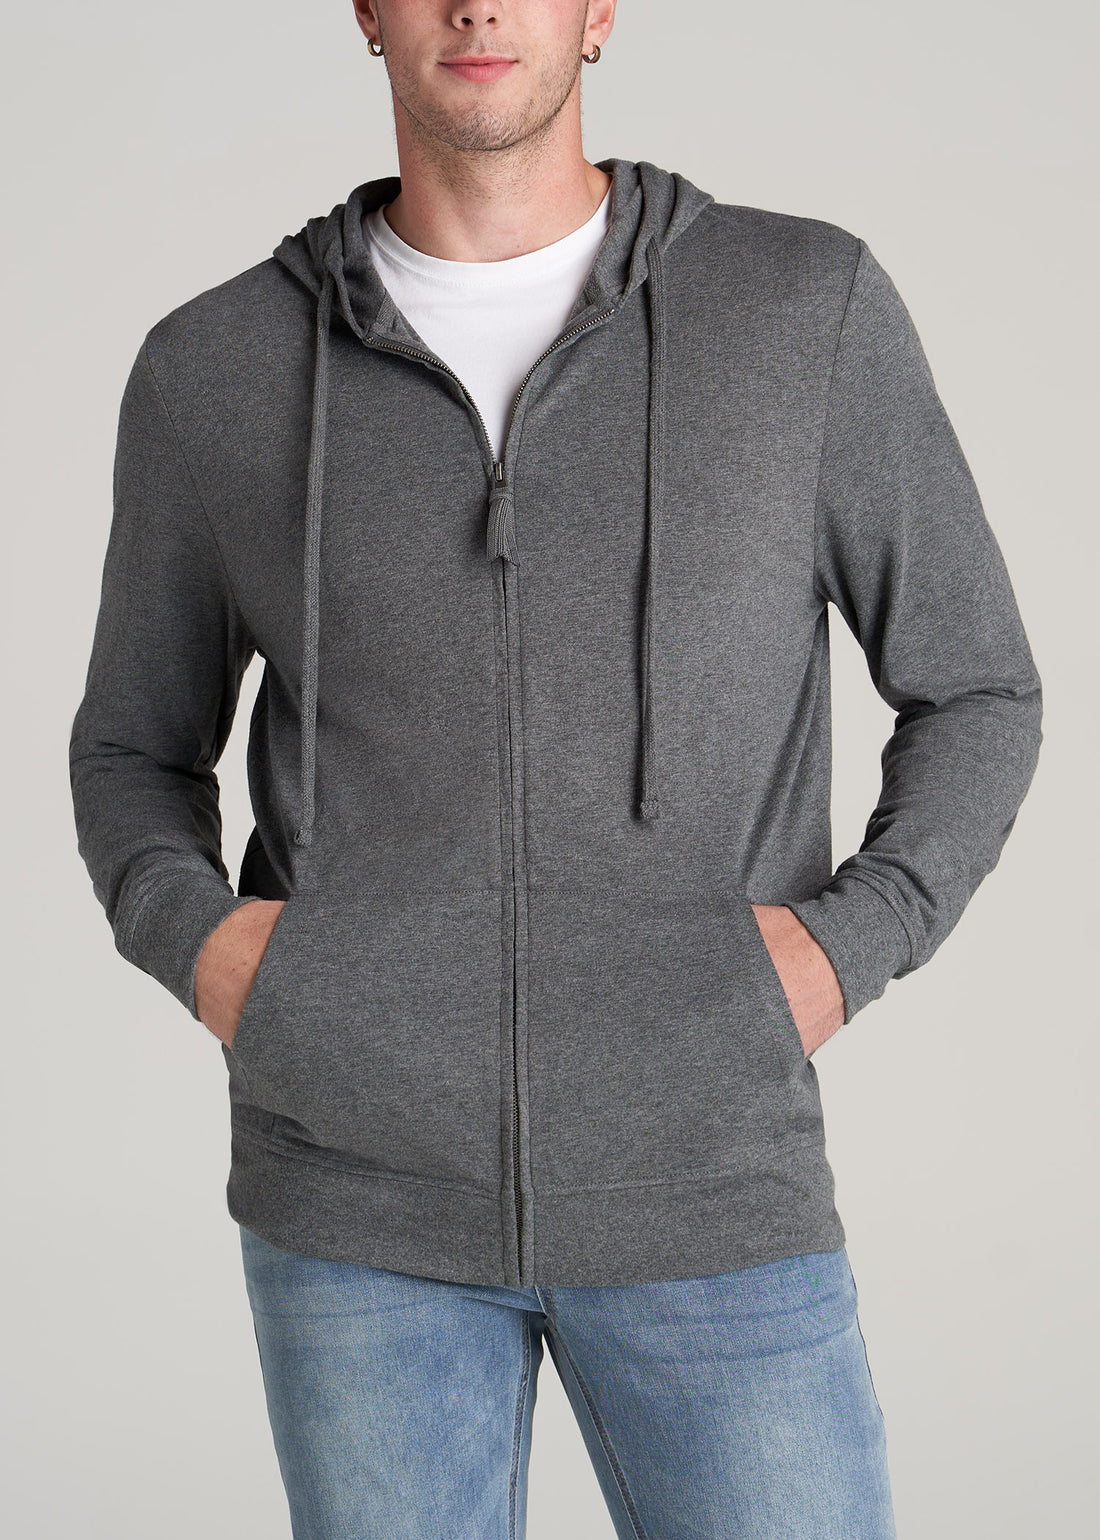 Tall man wearing American Tall's Long Sleeve Full Zip Jersey Hoodie in the color Charcoal Mix.